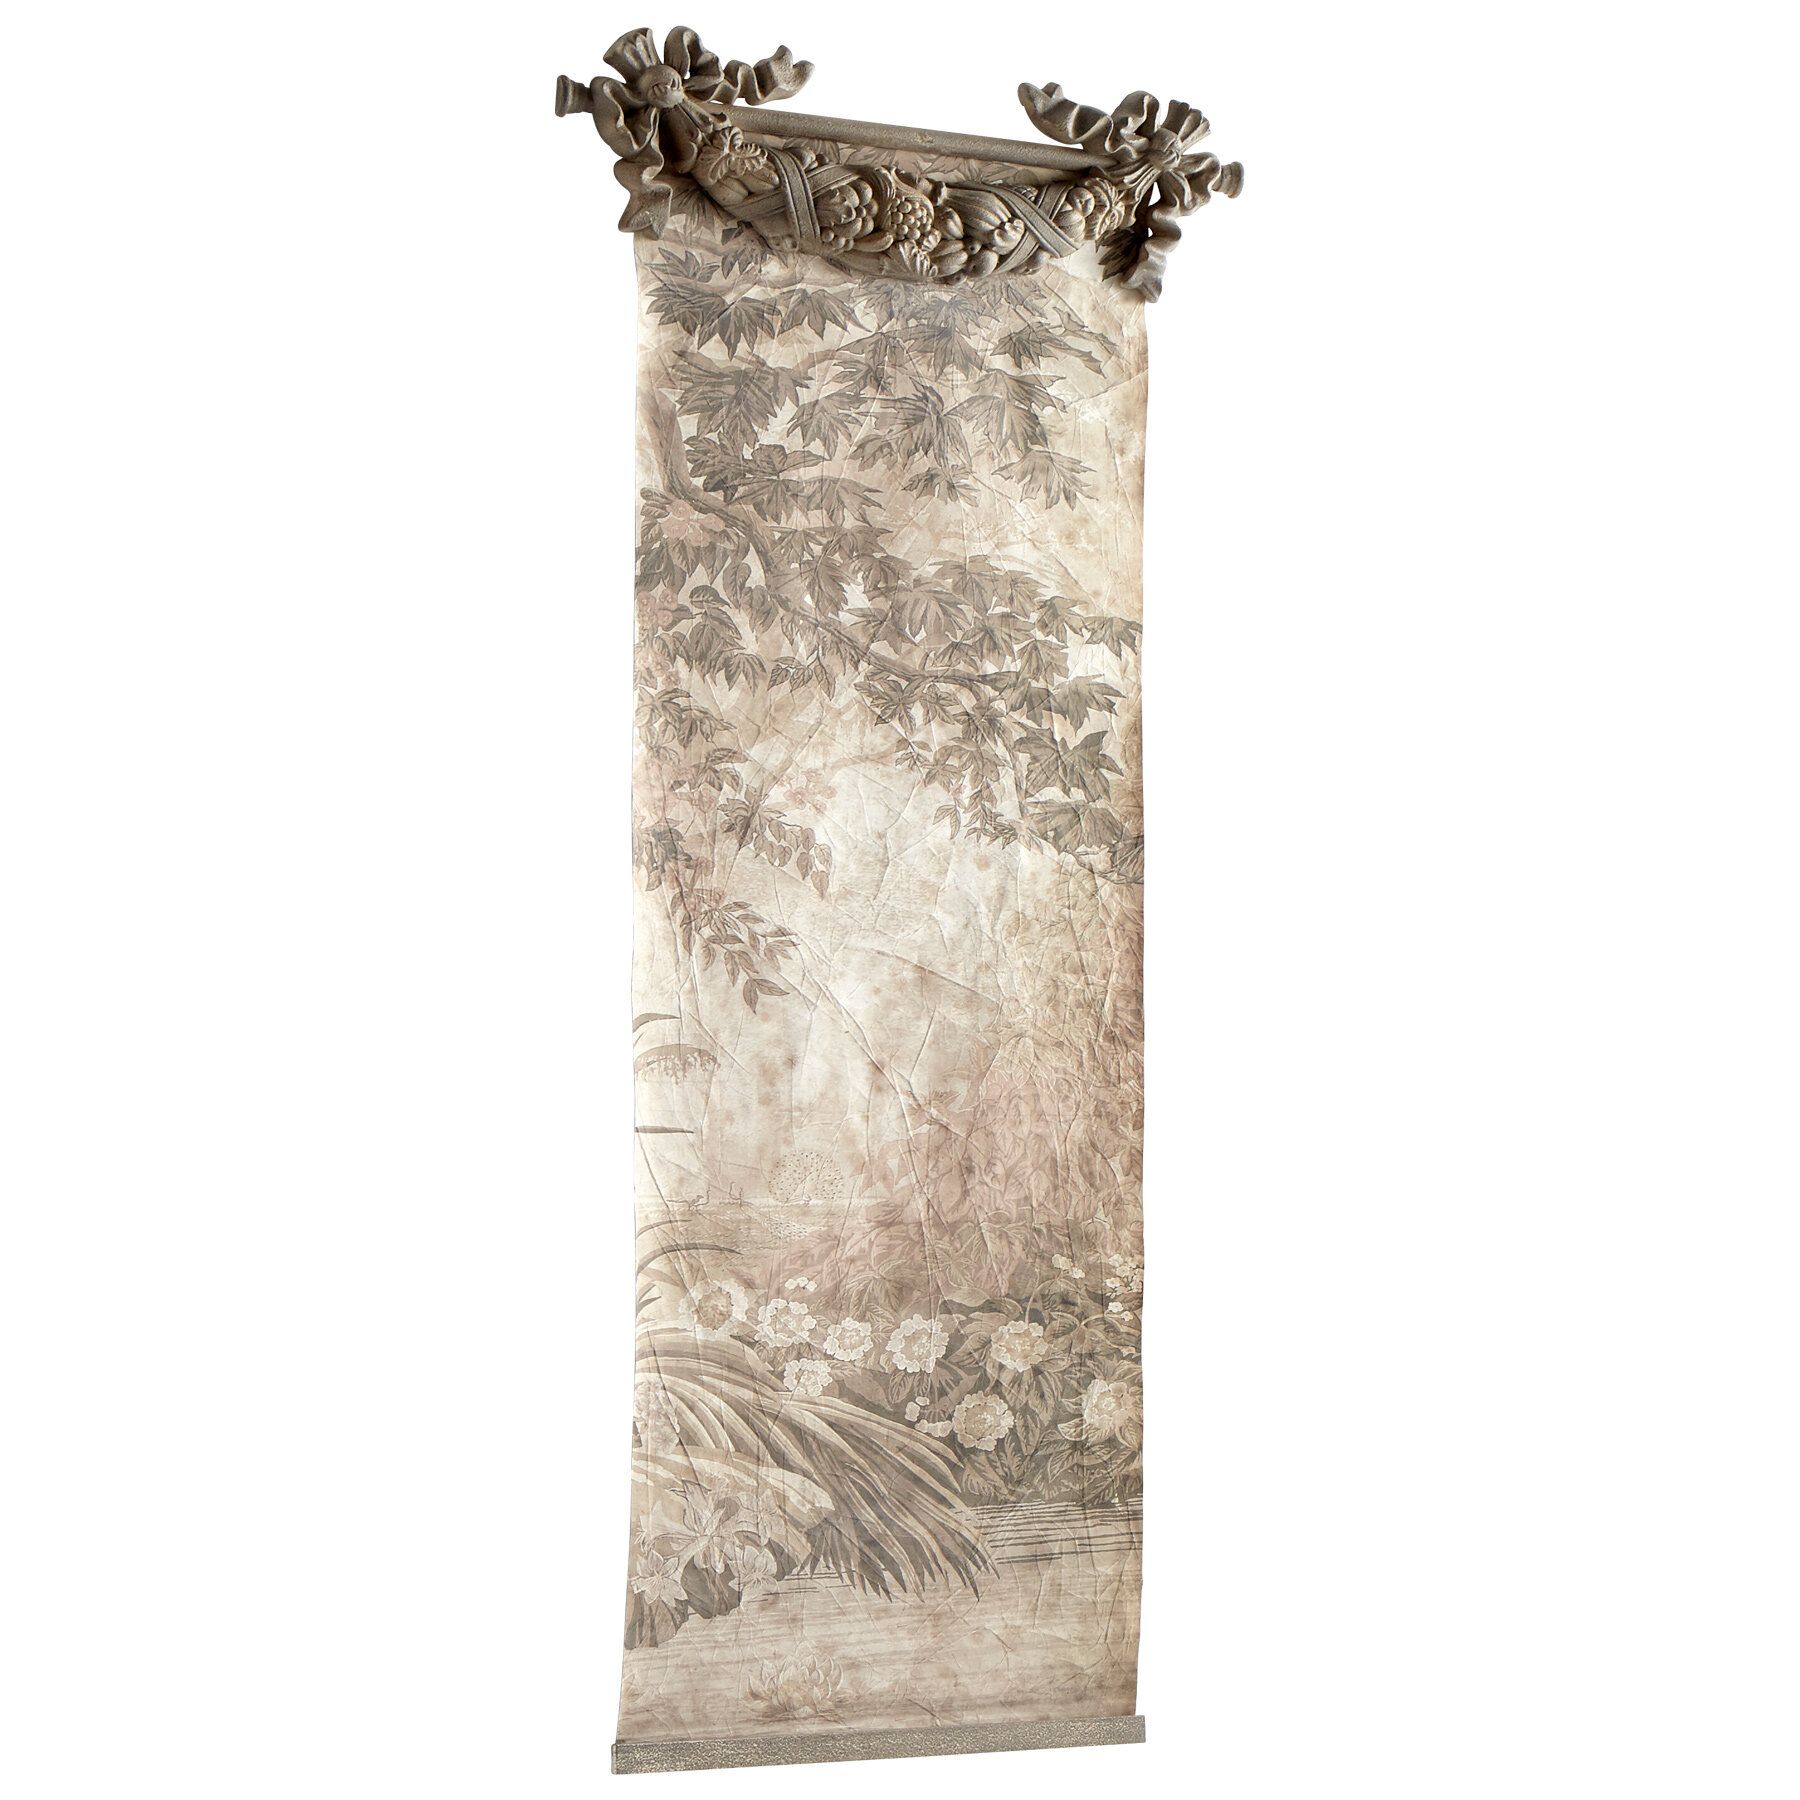 Blended Fabric Hidden Garden Chinoiserie Wall Hanging With Rod Within Most Popular Blended Fabric Wall Hangings (Gallery 19 of 20)